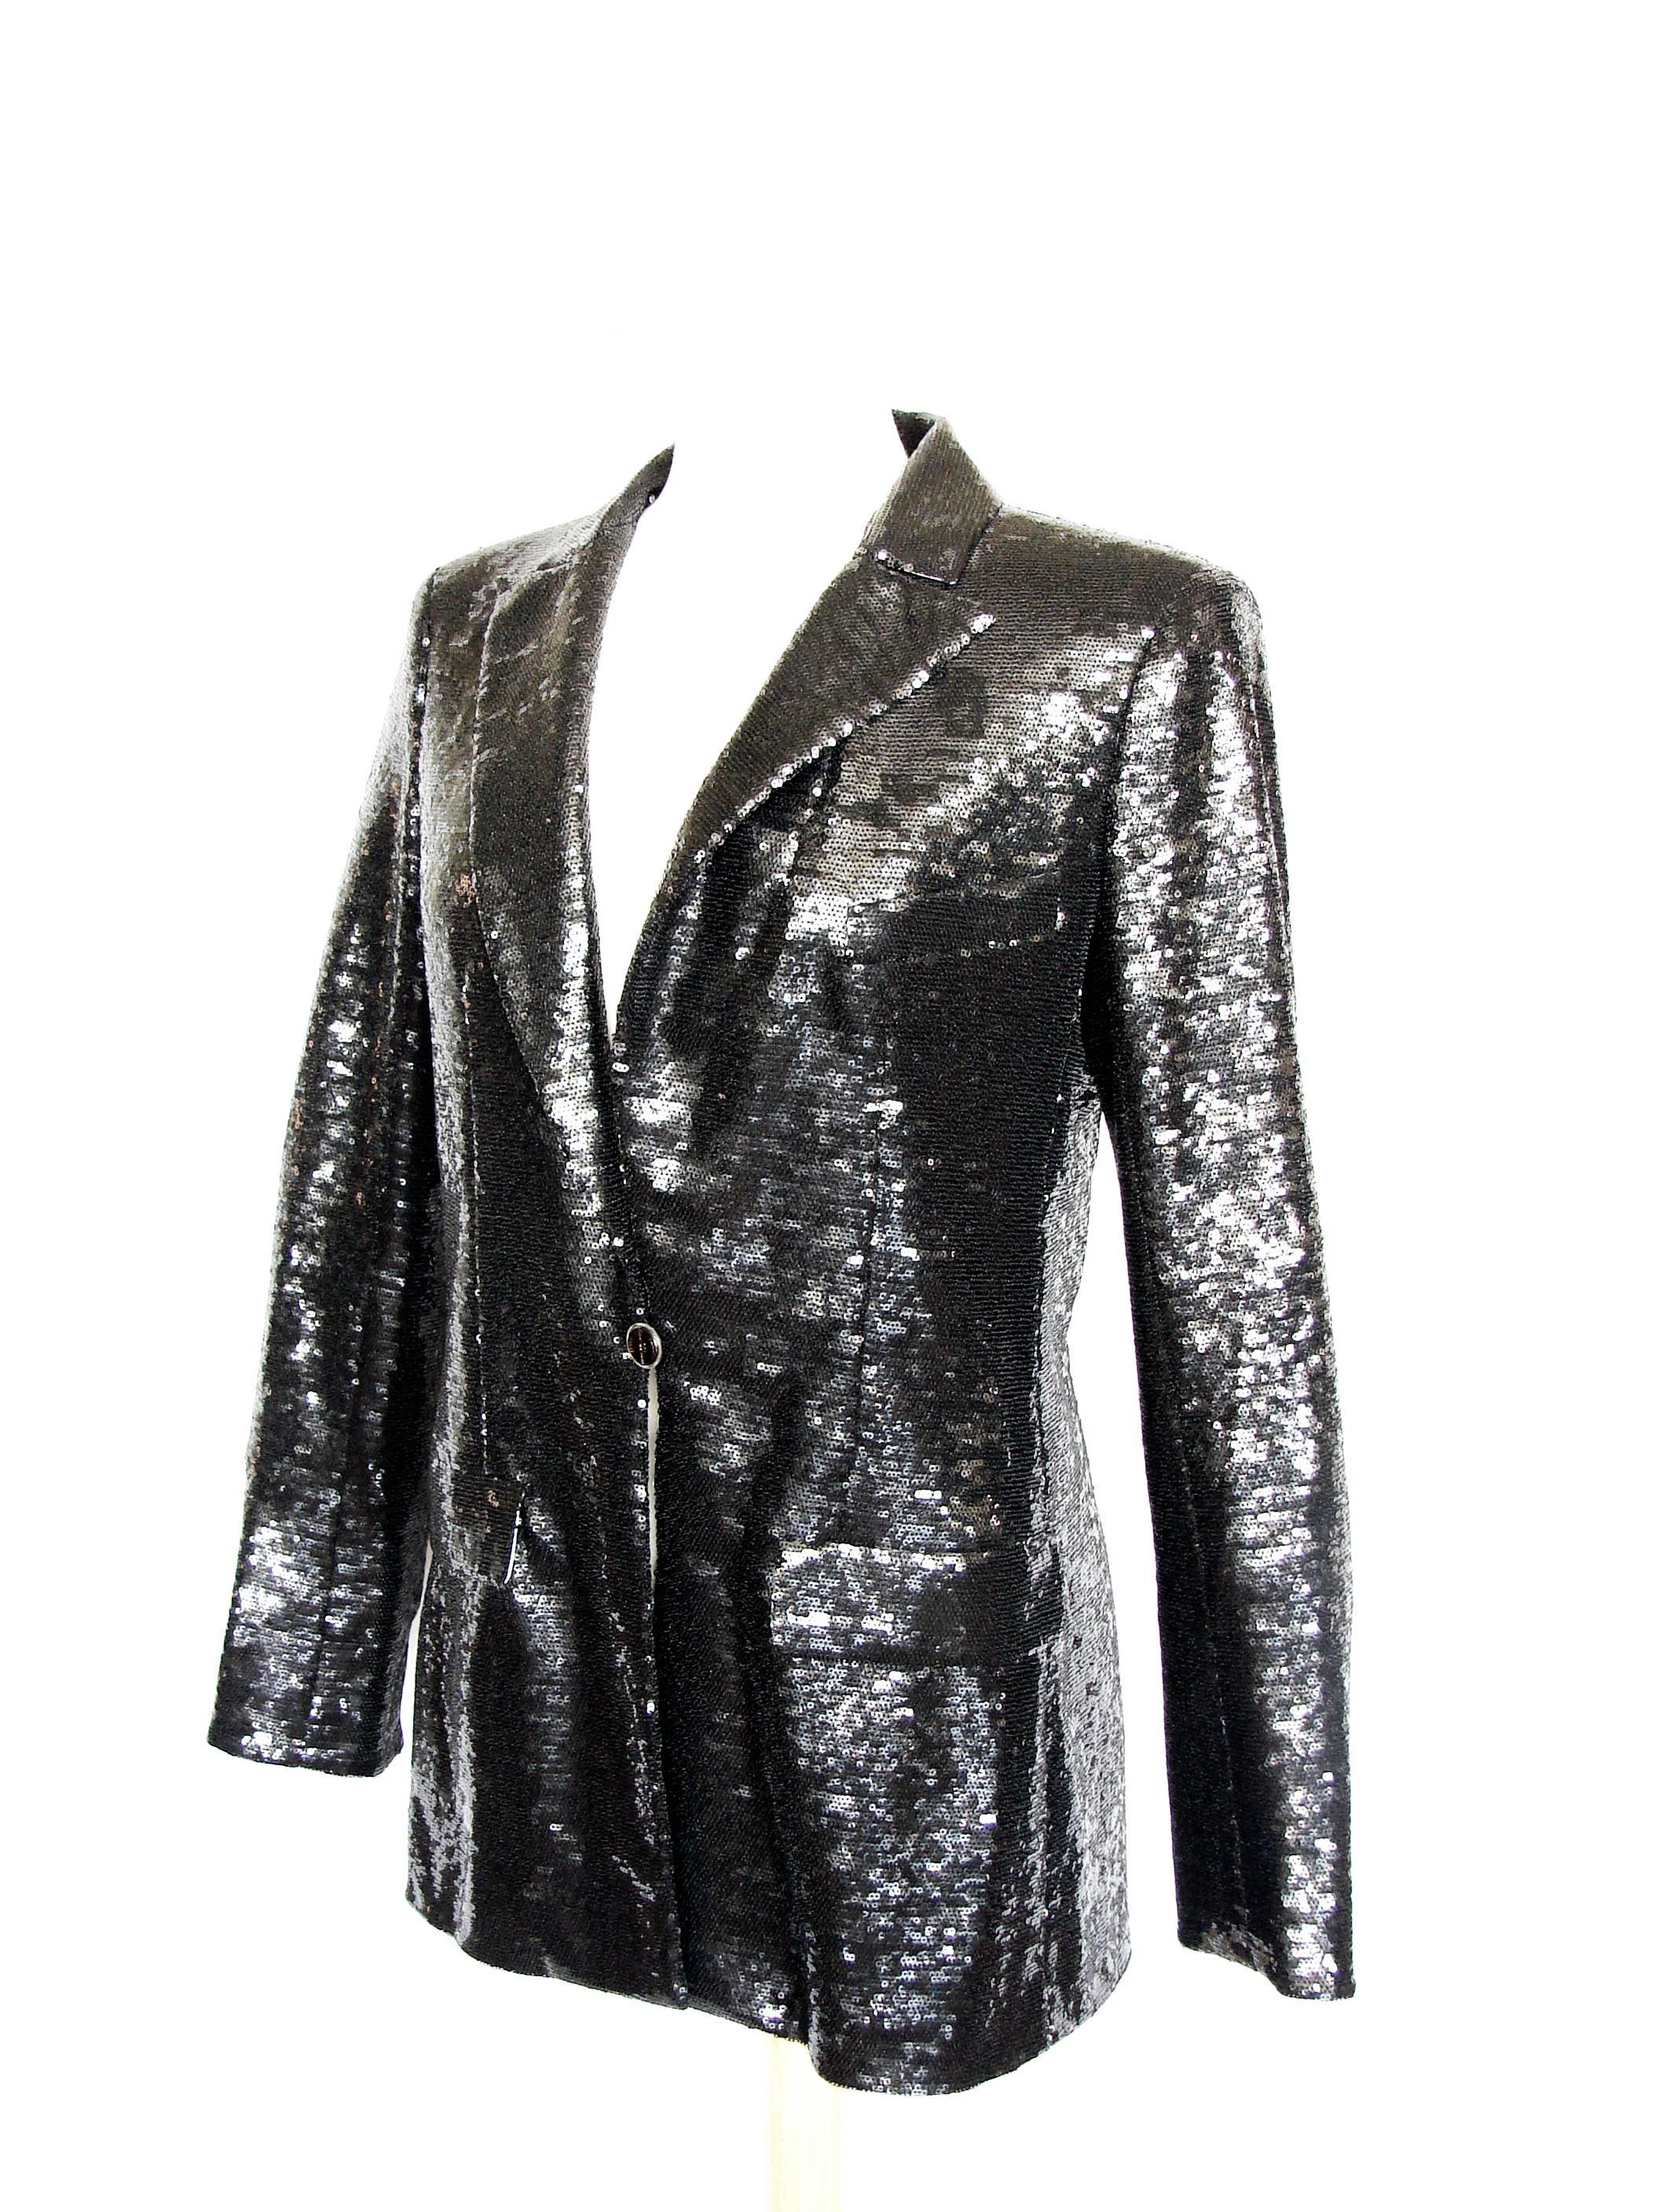 Women's Chanel Evening Jacket Black Sequins with Contrast Cuffs and Collar Sz 44 09C 